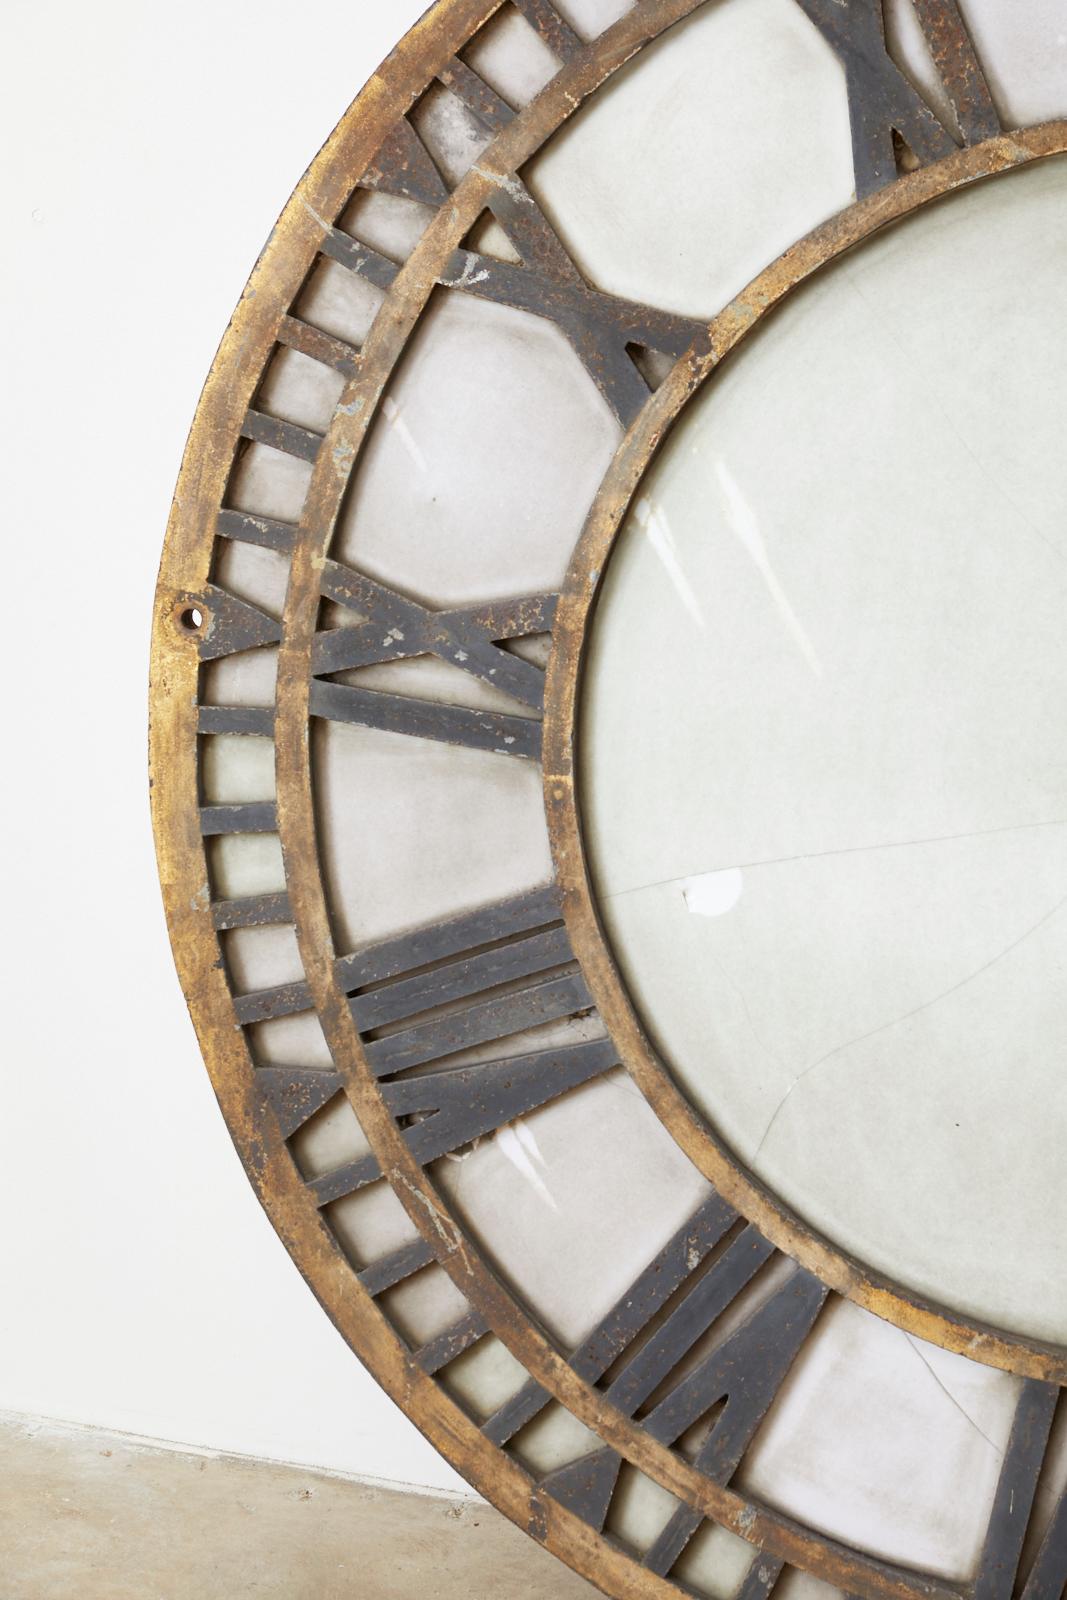 Hand-Crafted 19th Century French Iron and Milk Glass Clock Face